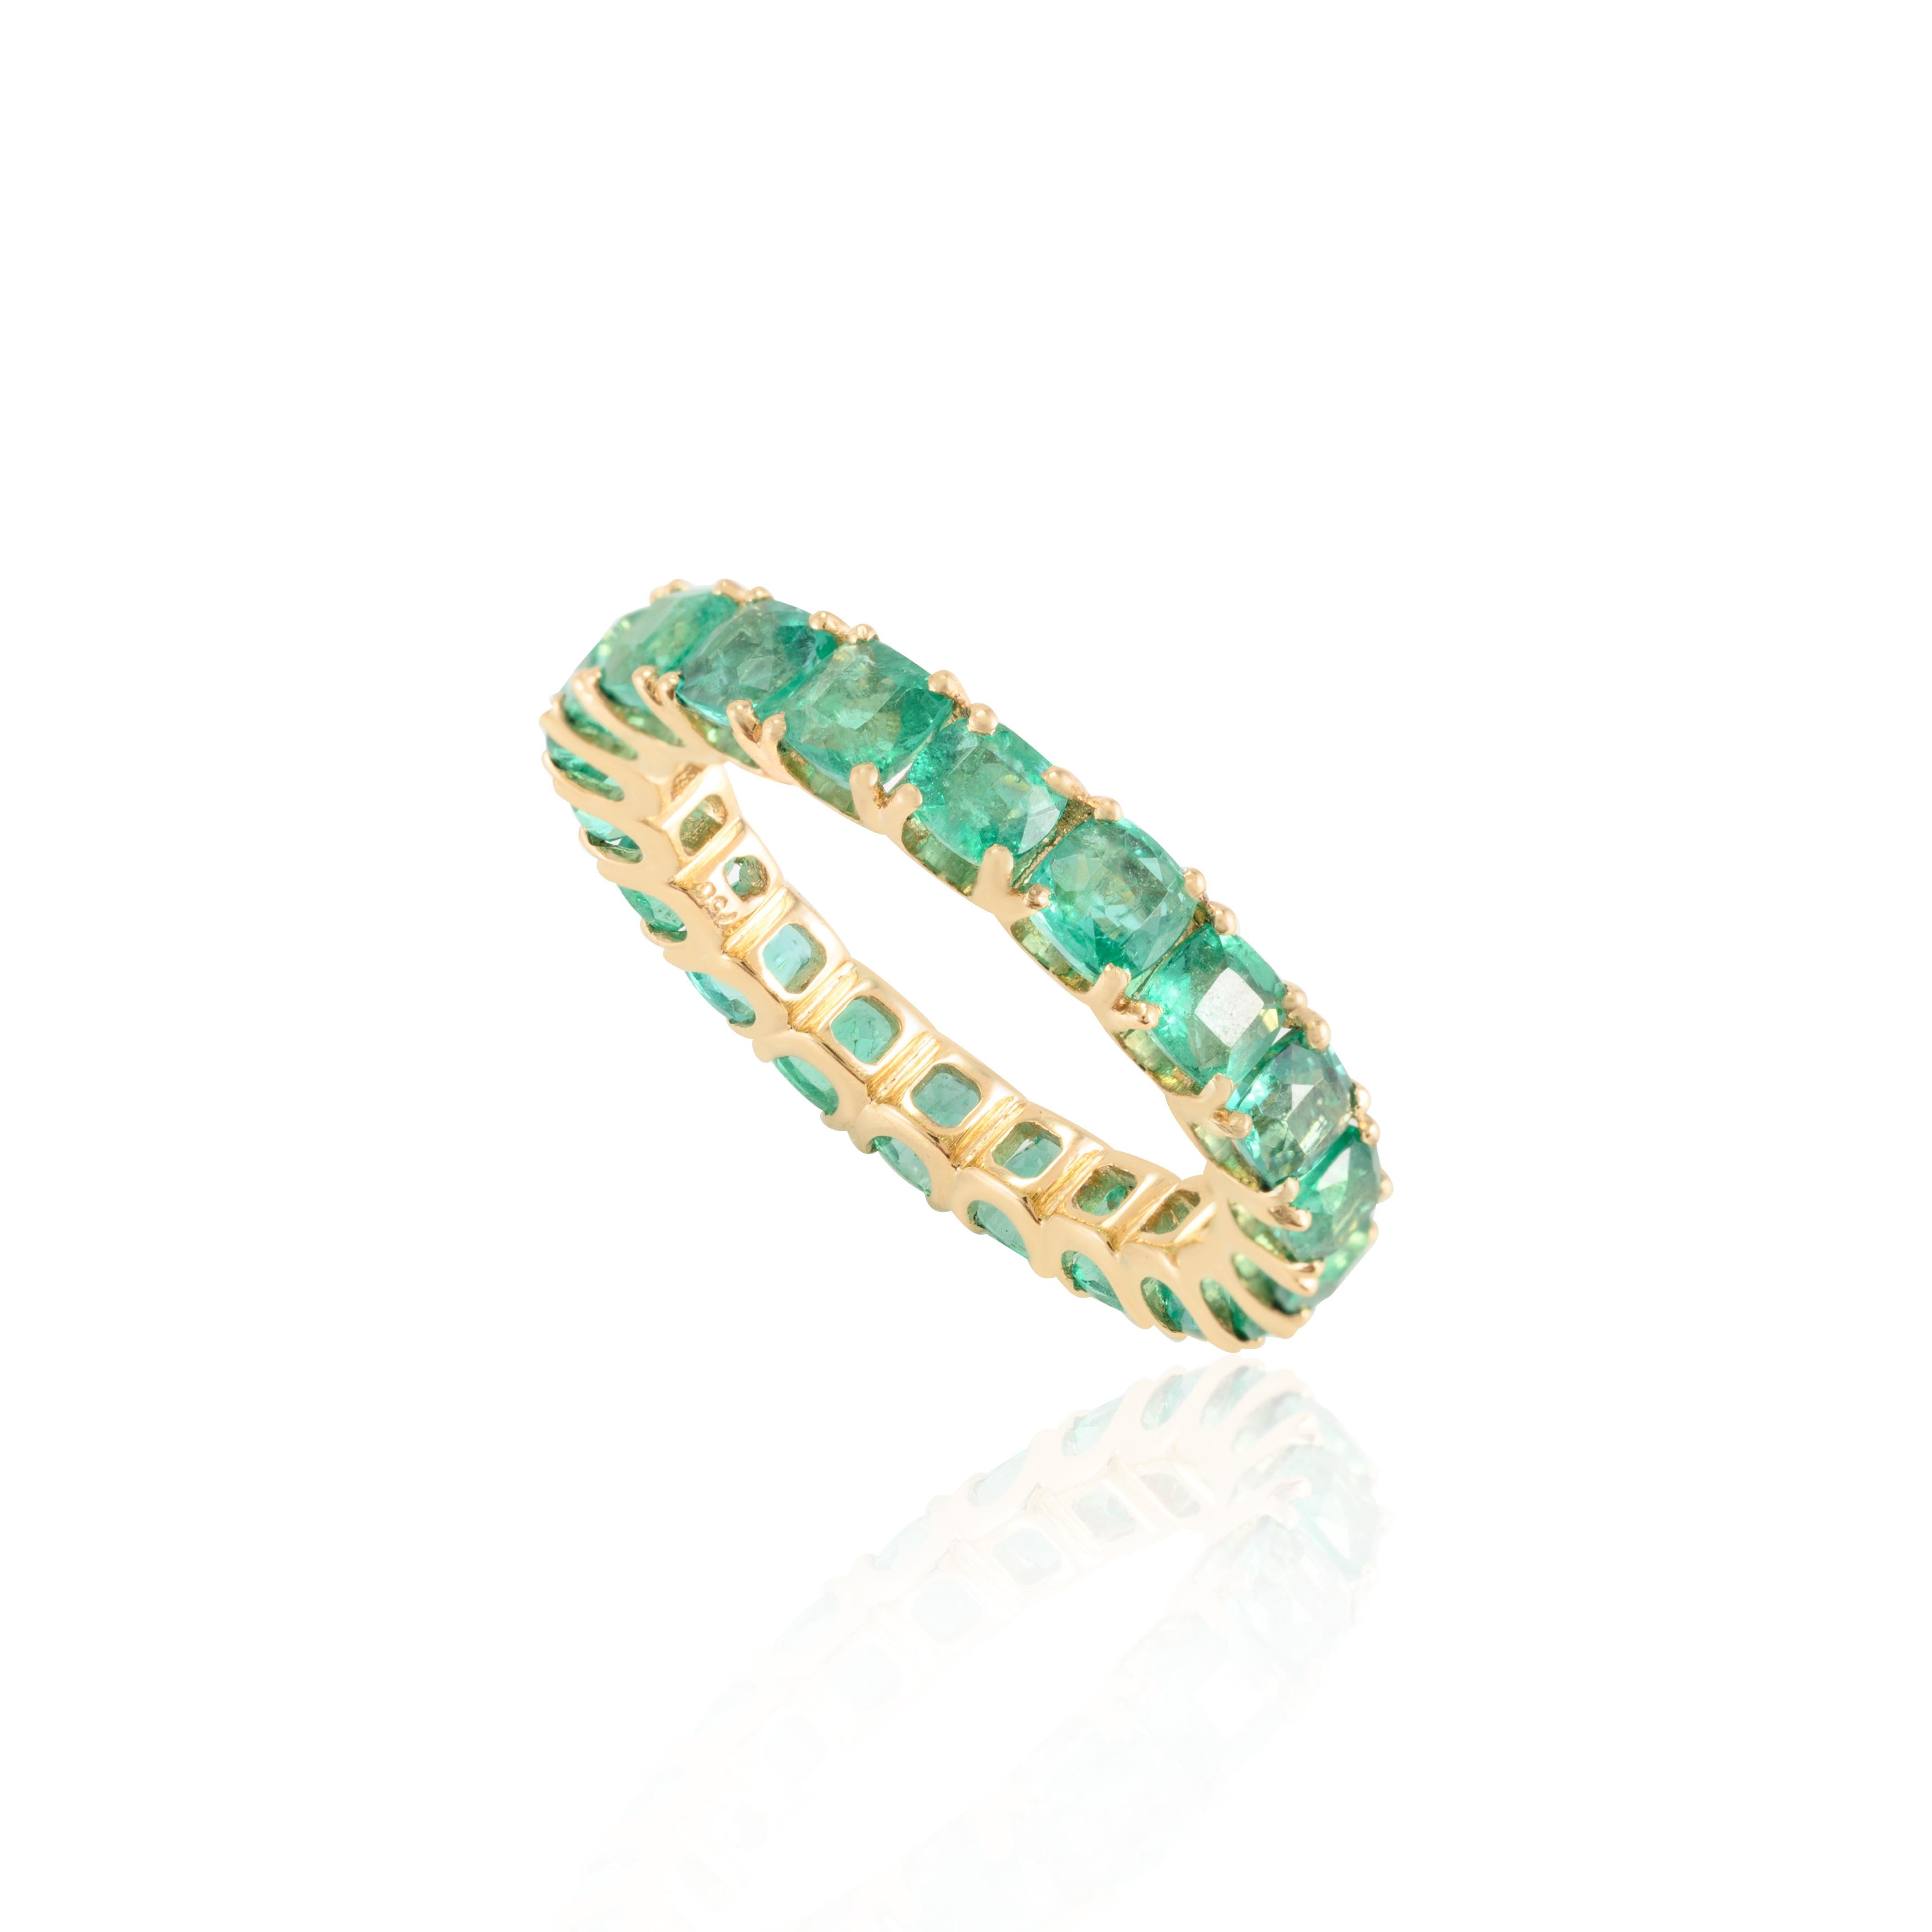 For Sale:  18k Solid Yellow Gold 4.06 CTW Cushion Emerald Eternity Band Ring 5